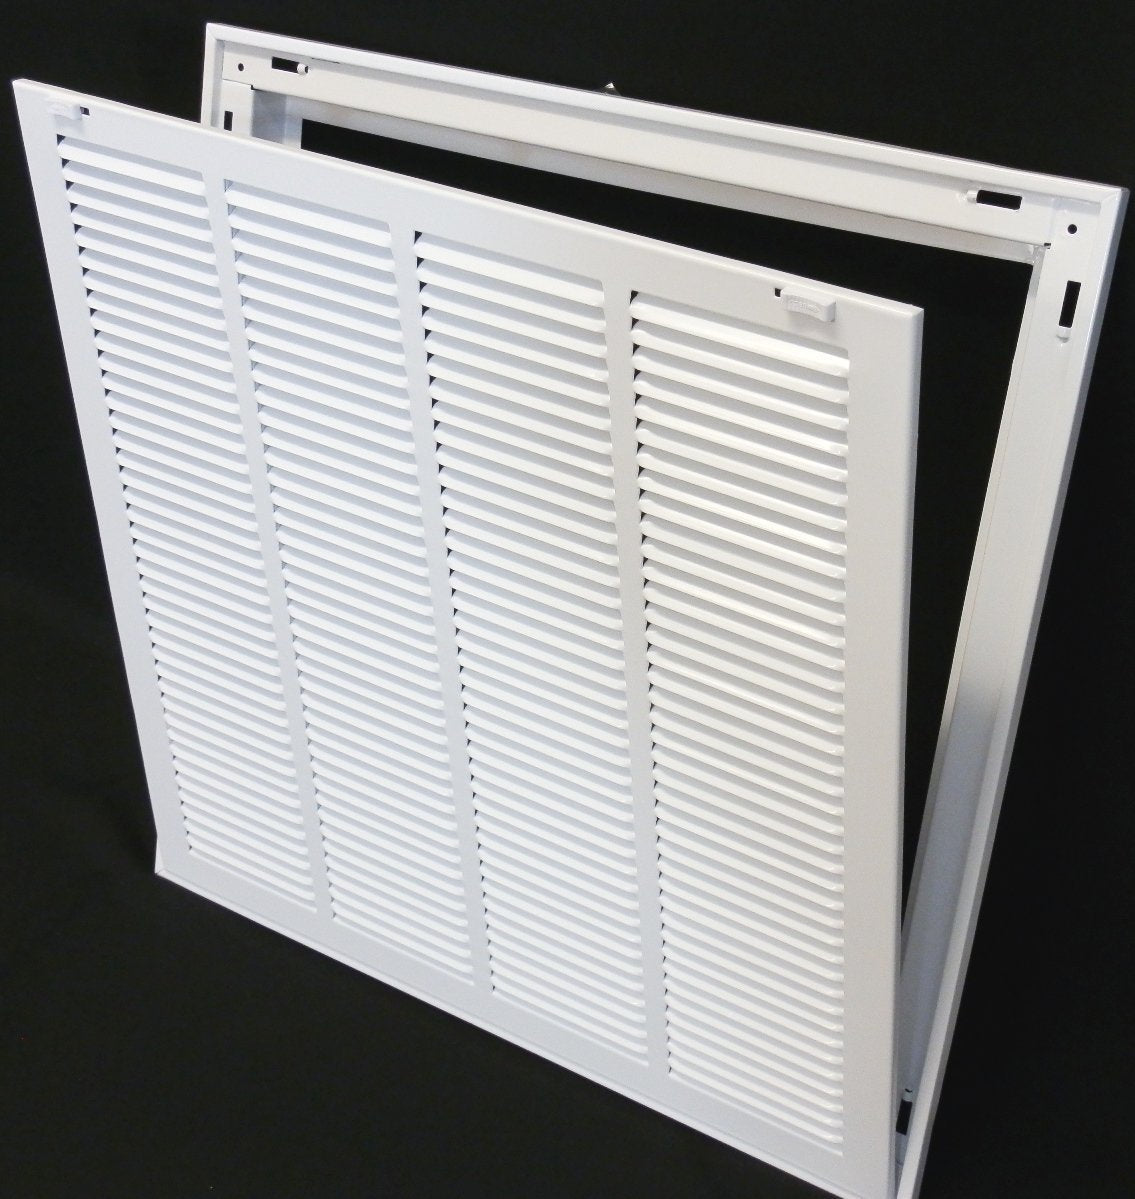 20&quot; X 26&quot; Steel Return Air Filter Grille for 1&quot; Filter - Removable Frame - [Outer Dimensions: 22 5/8&quot; X 28 5/8&quot;]